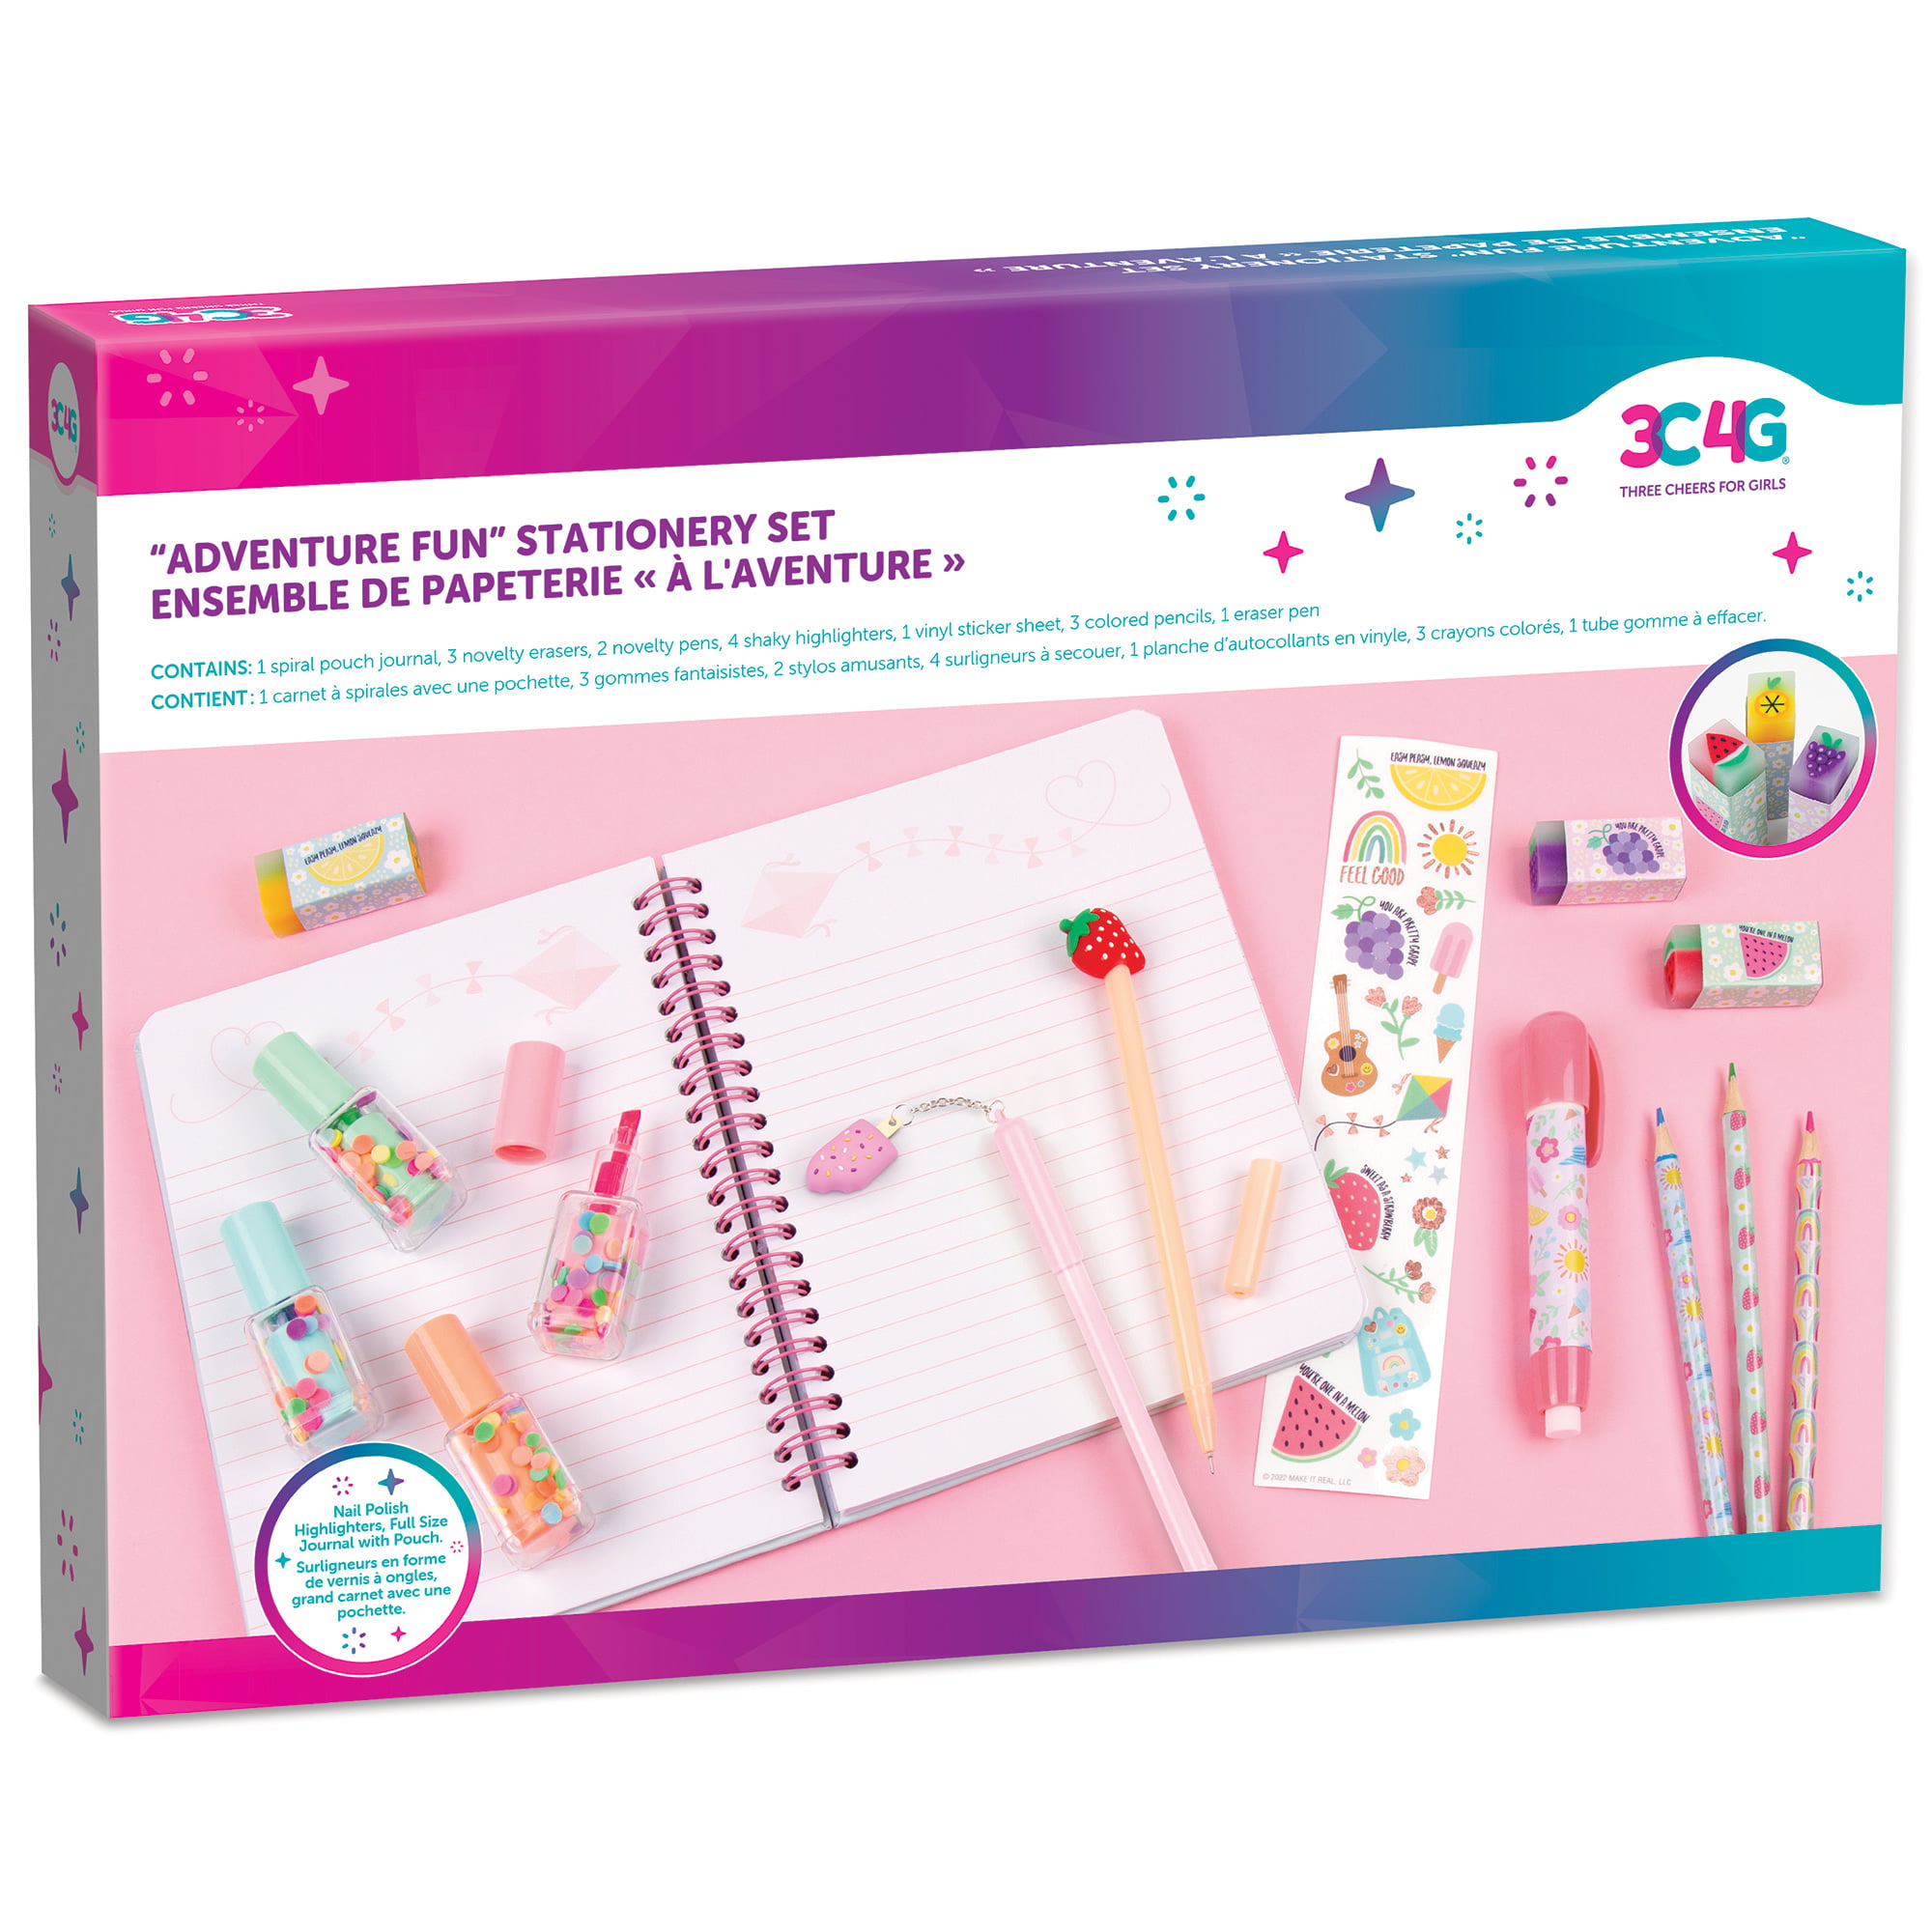  3C4G THREE CHEERS FOR GIRLS Graffiti Street Style Jumbo  Stationery Set - DIY Journaling Kit for Girls with Diary, Gel Pens, Puzzle  Erasers, Stickers & More - Kids Journal for Girls